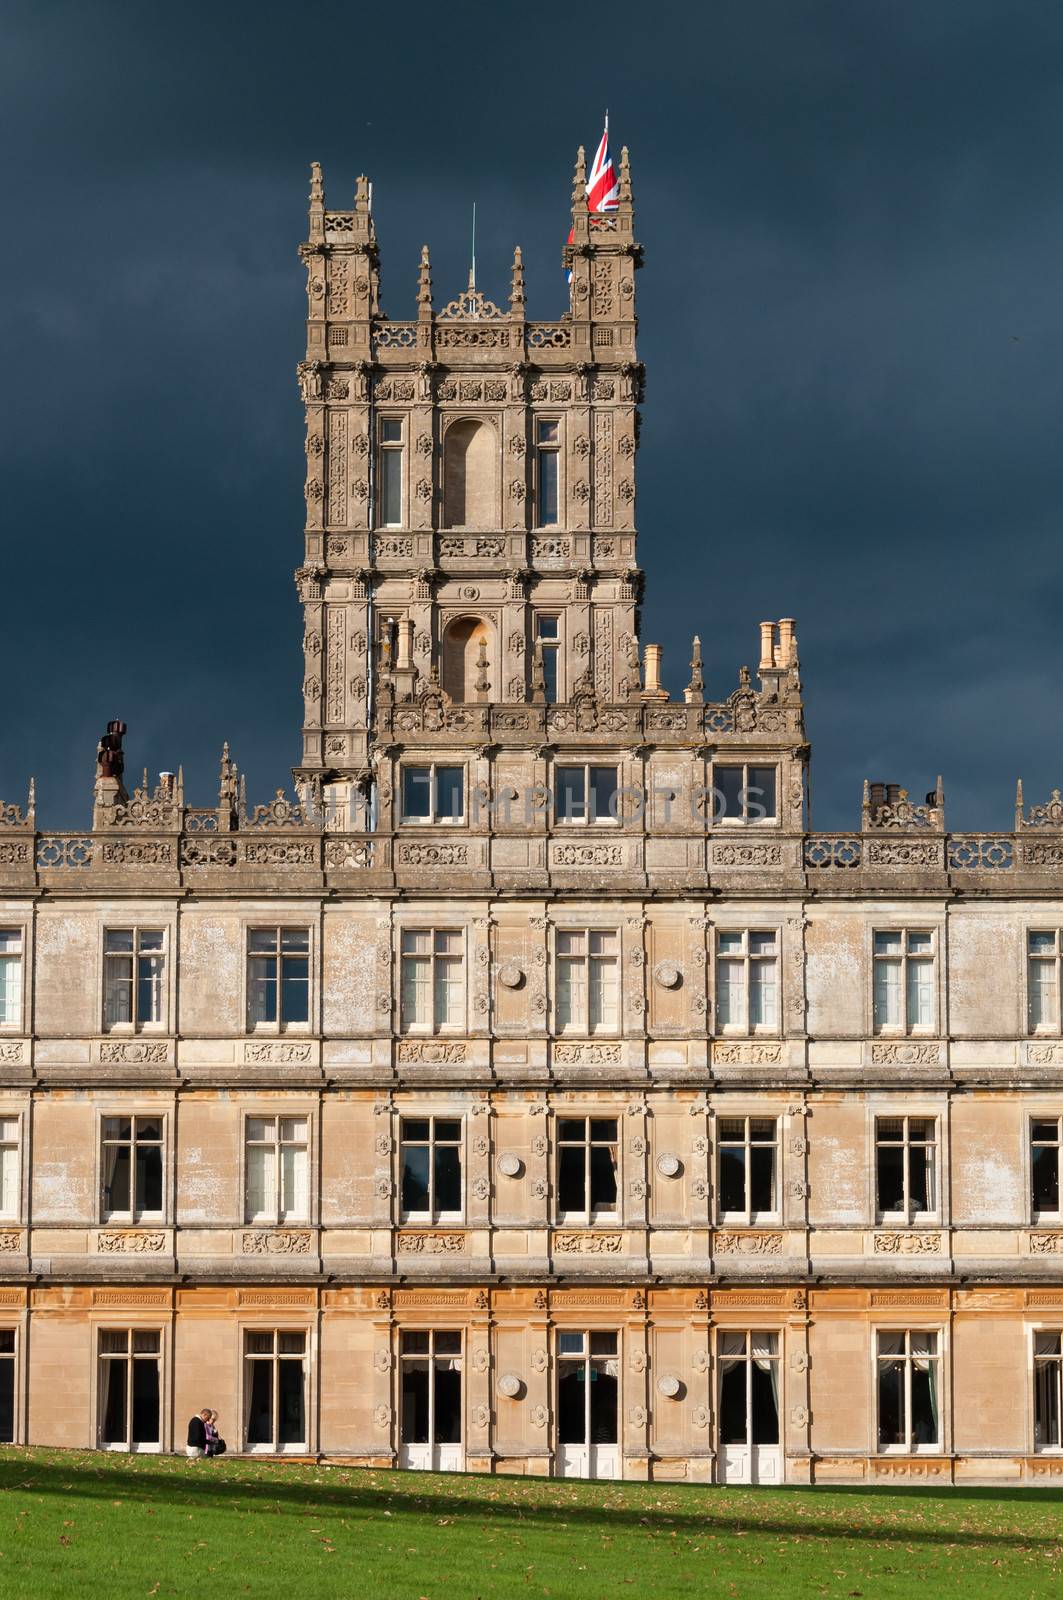 NEWBURY, UK - CIRCA OCTOBER 2011: Highclere Castle is the main setting for the ITV period drama Downton Abbey. Downton Abbey is broadcasted in more than 100 countries.